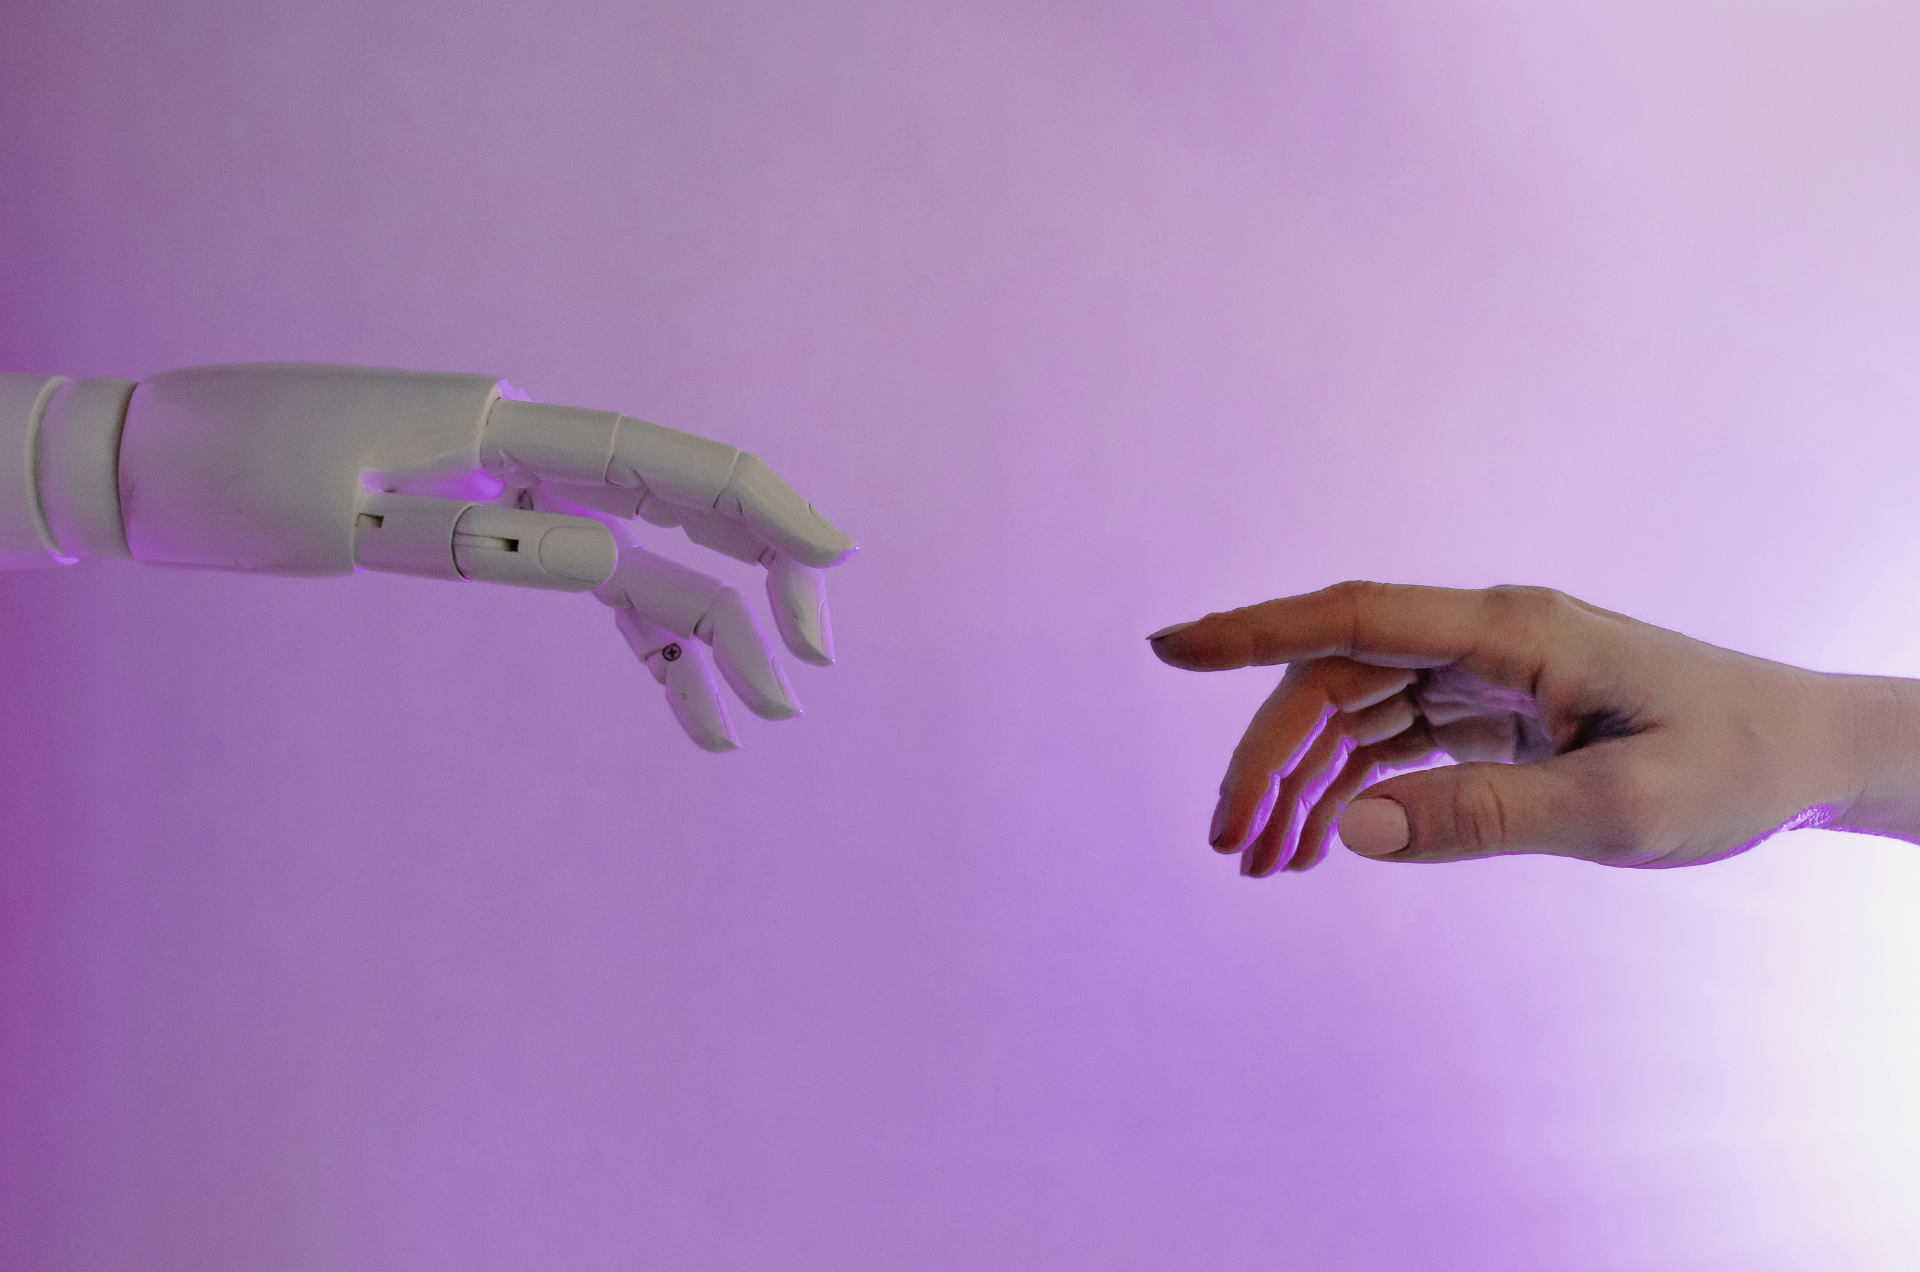 Two hands reach toward each other. One hand is human, the other is a robot hand.